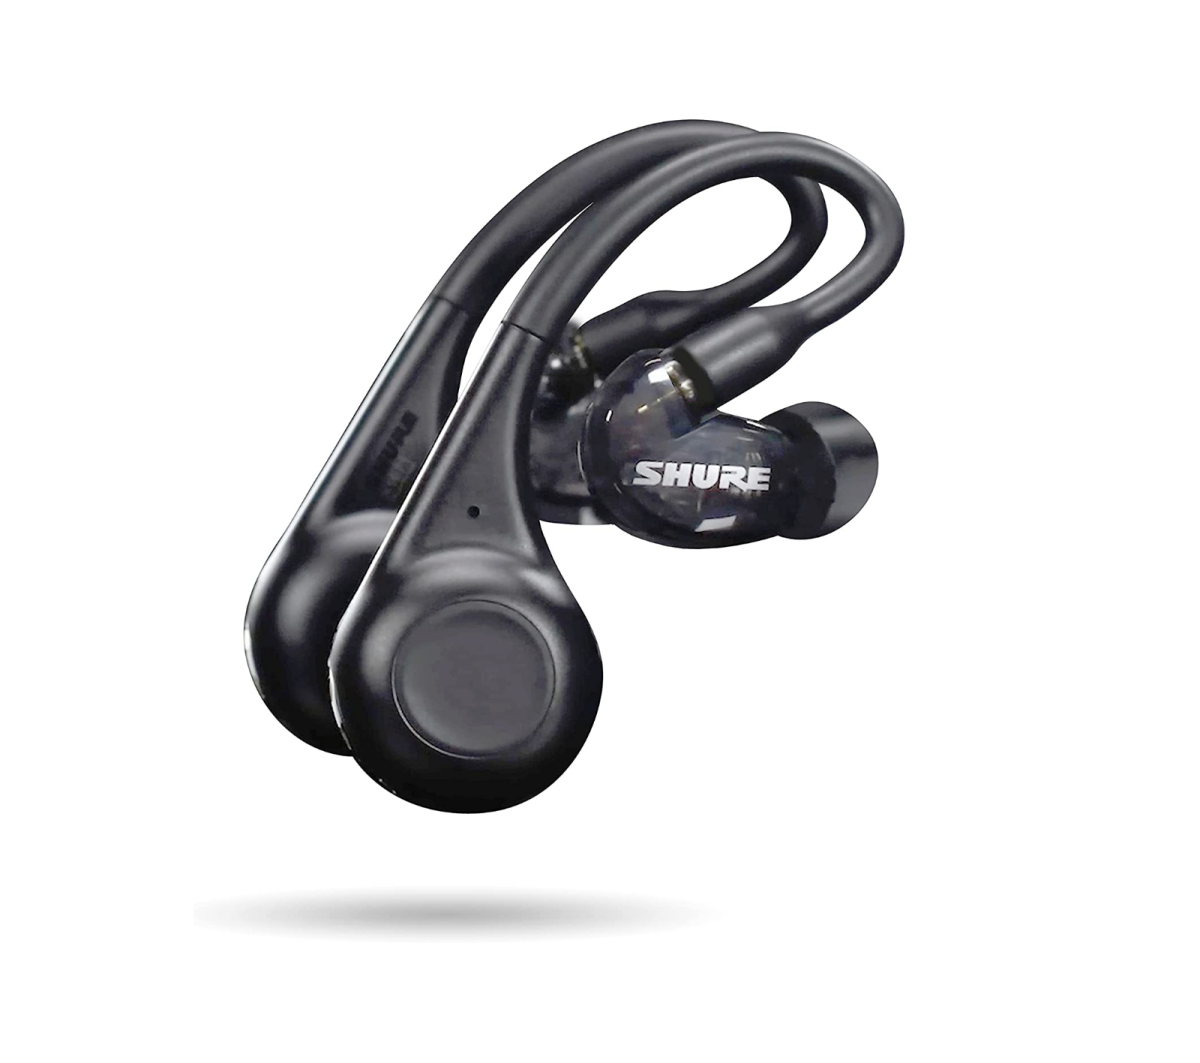 A pair of Shure AONIC 215 TW2 earbuds